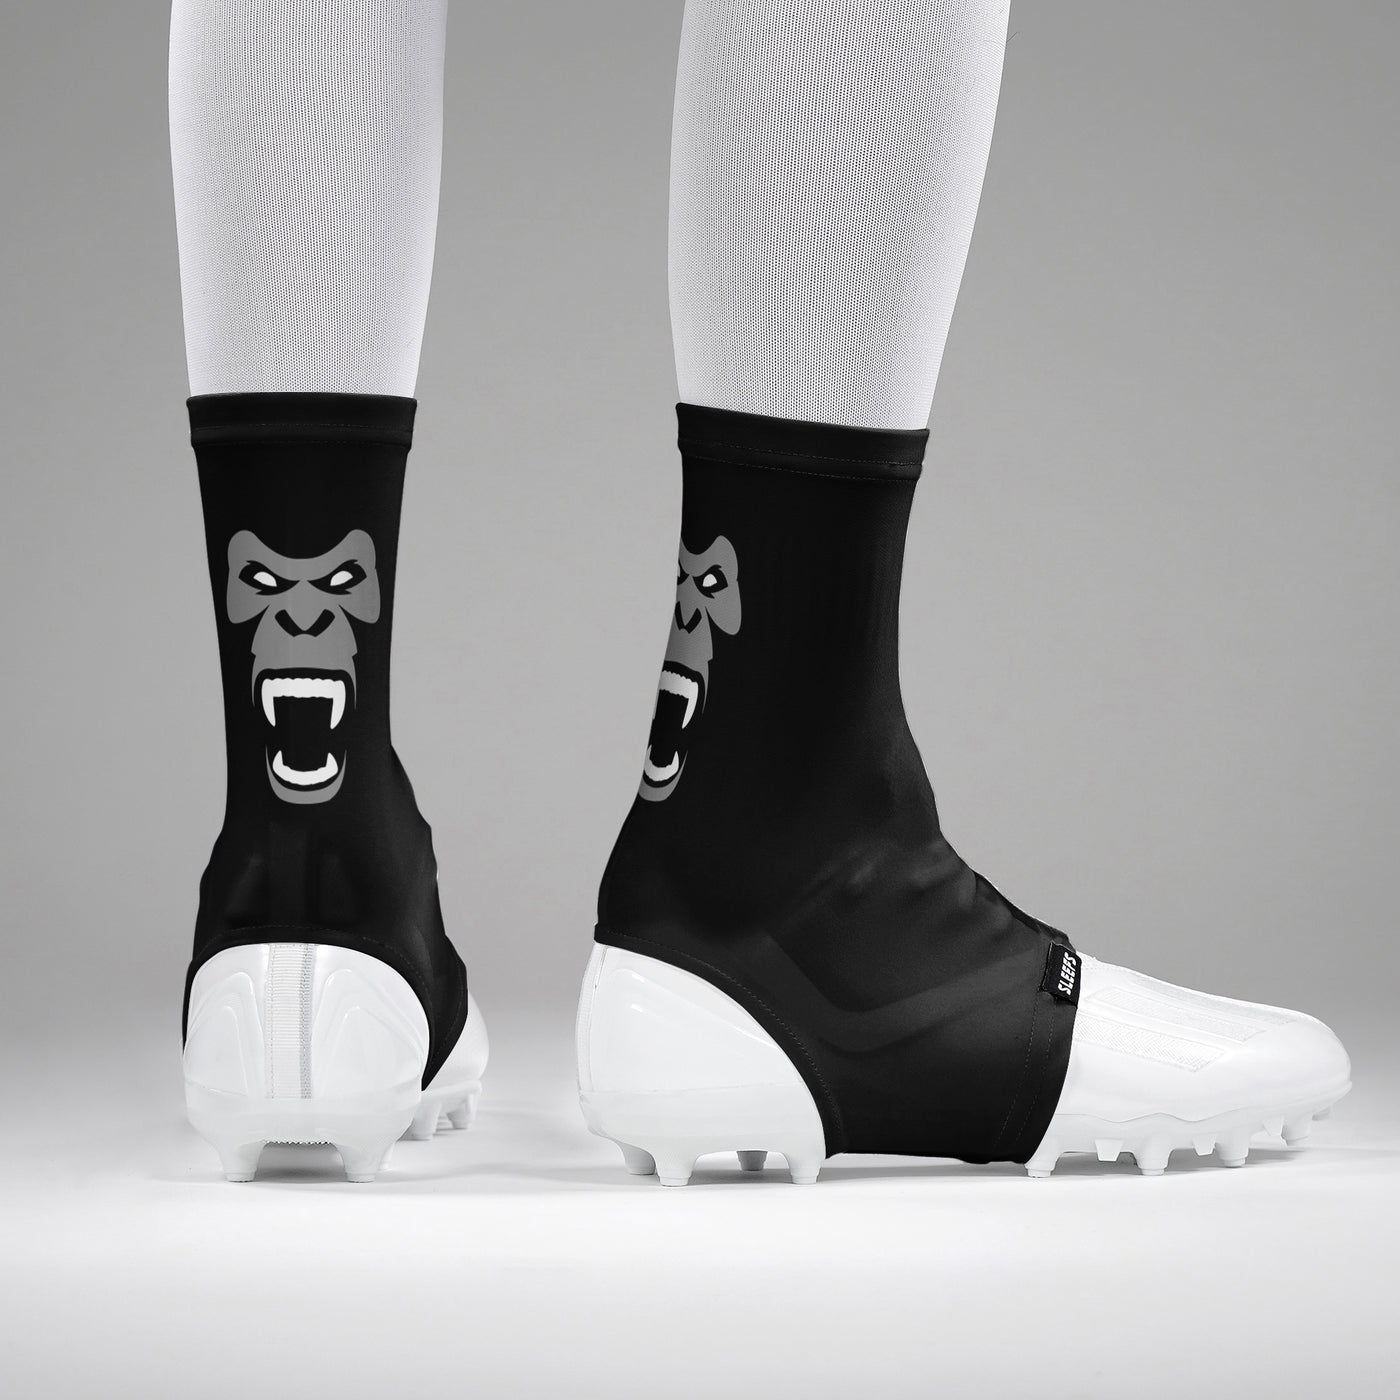 Gorilla Face Spats / Cleat Covers